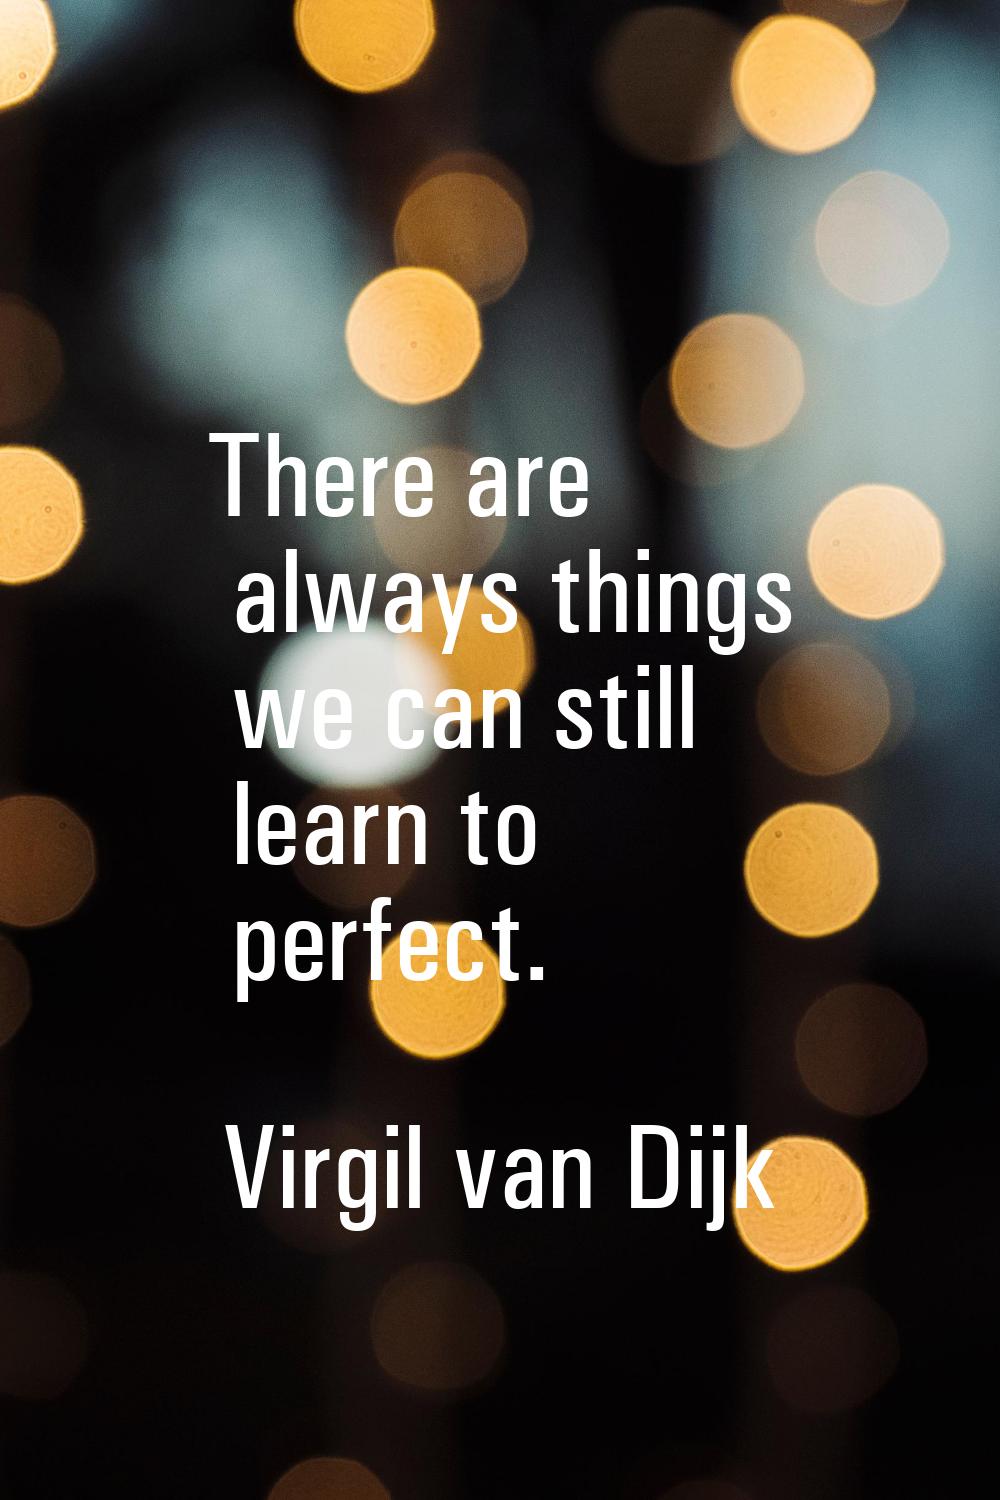 There are always things we can still learn to perfect.